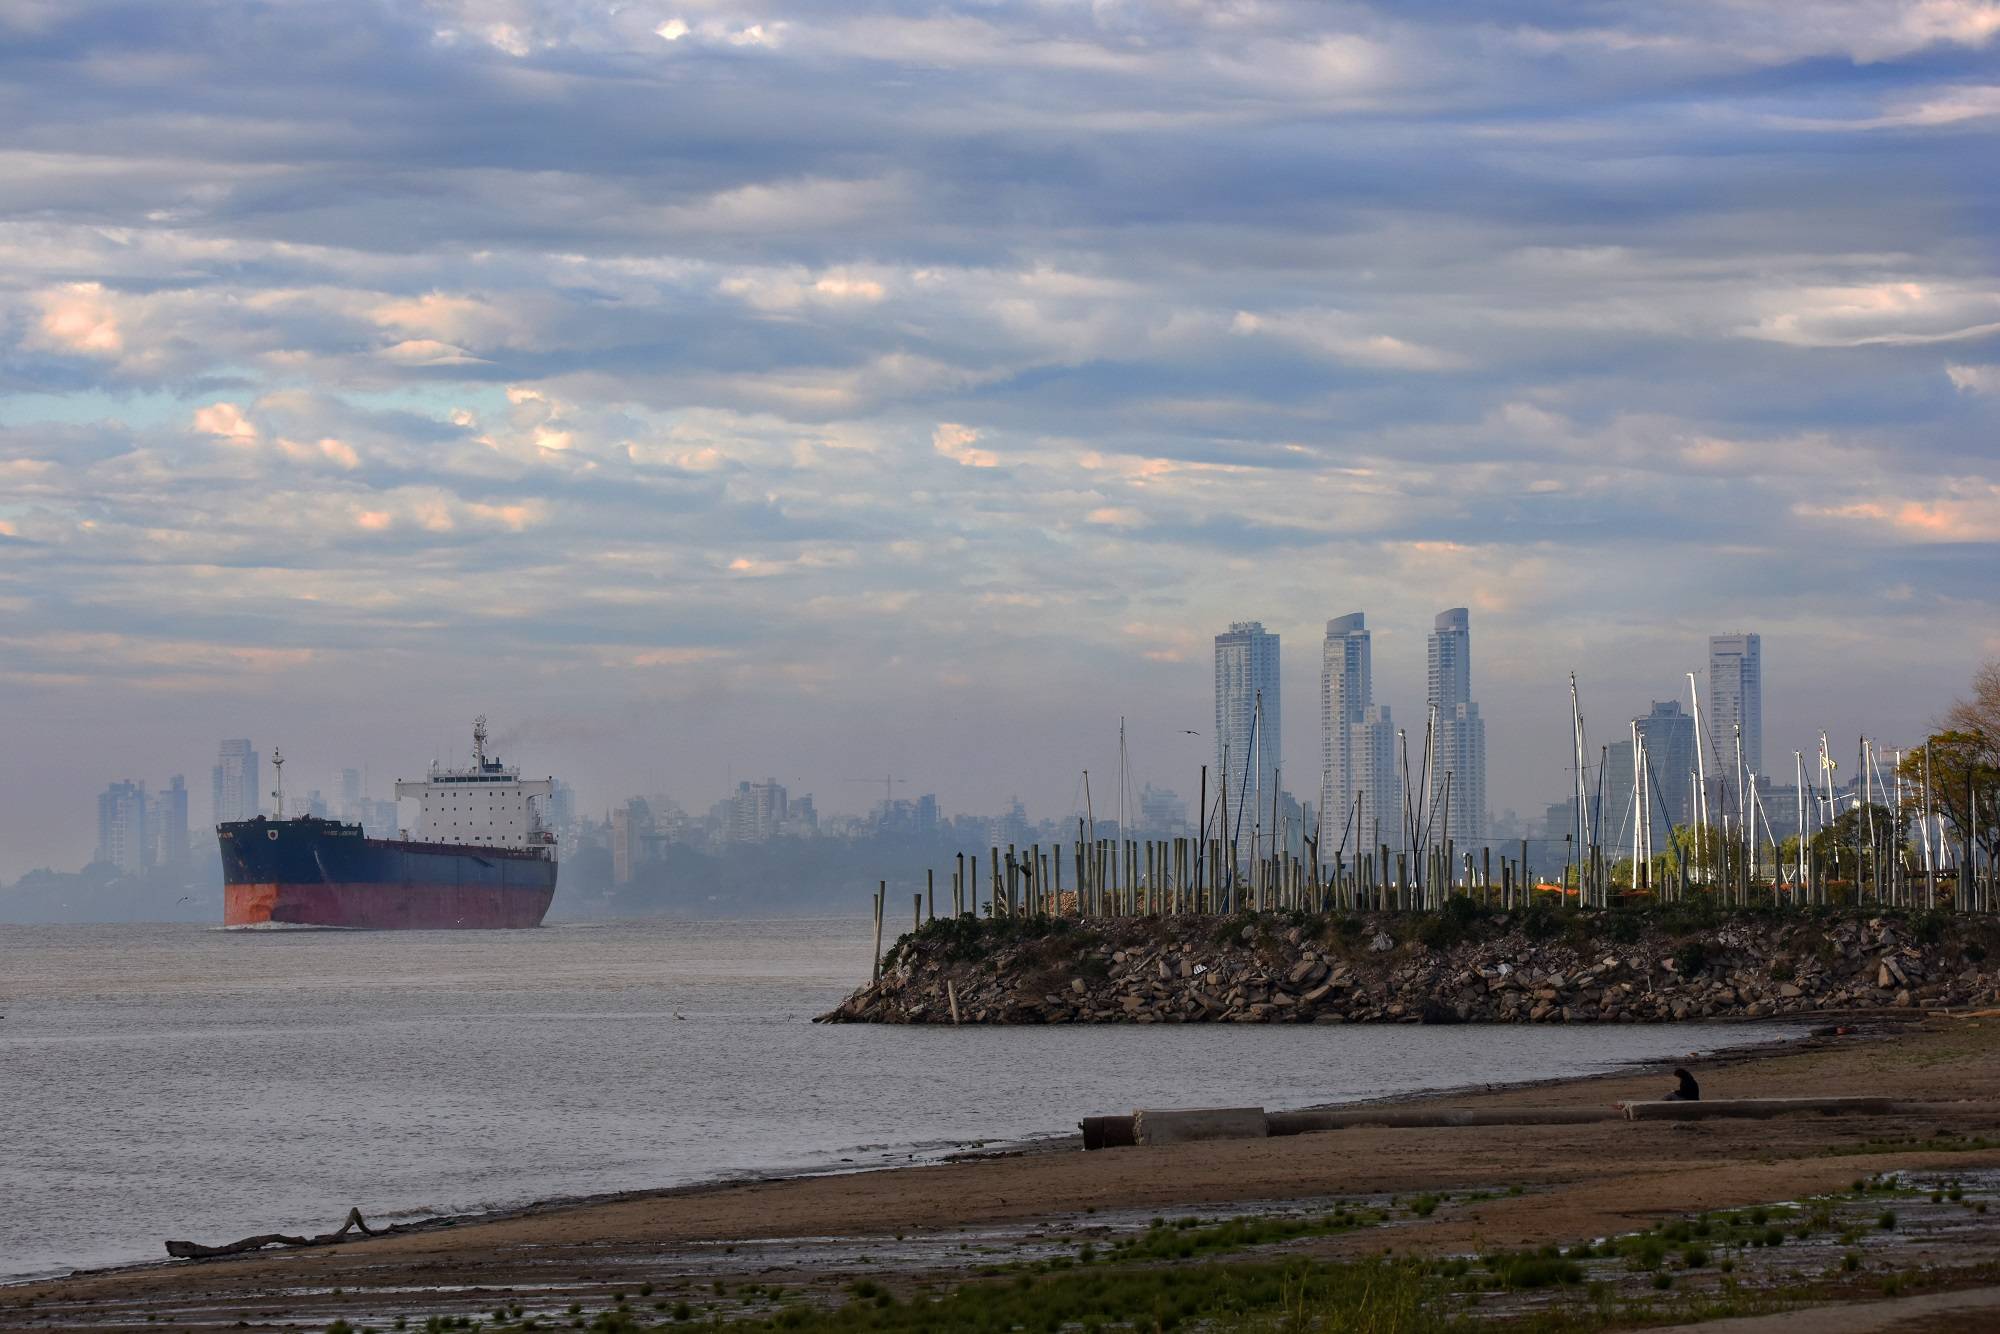 Argentine grain port workers launched surprise strikes to protest stalled wage talks, their labor union said on Monday, delaying shipments from one of the world’s top exporters.